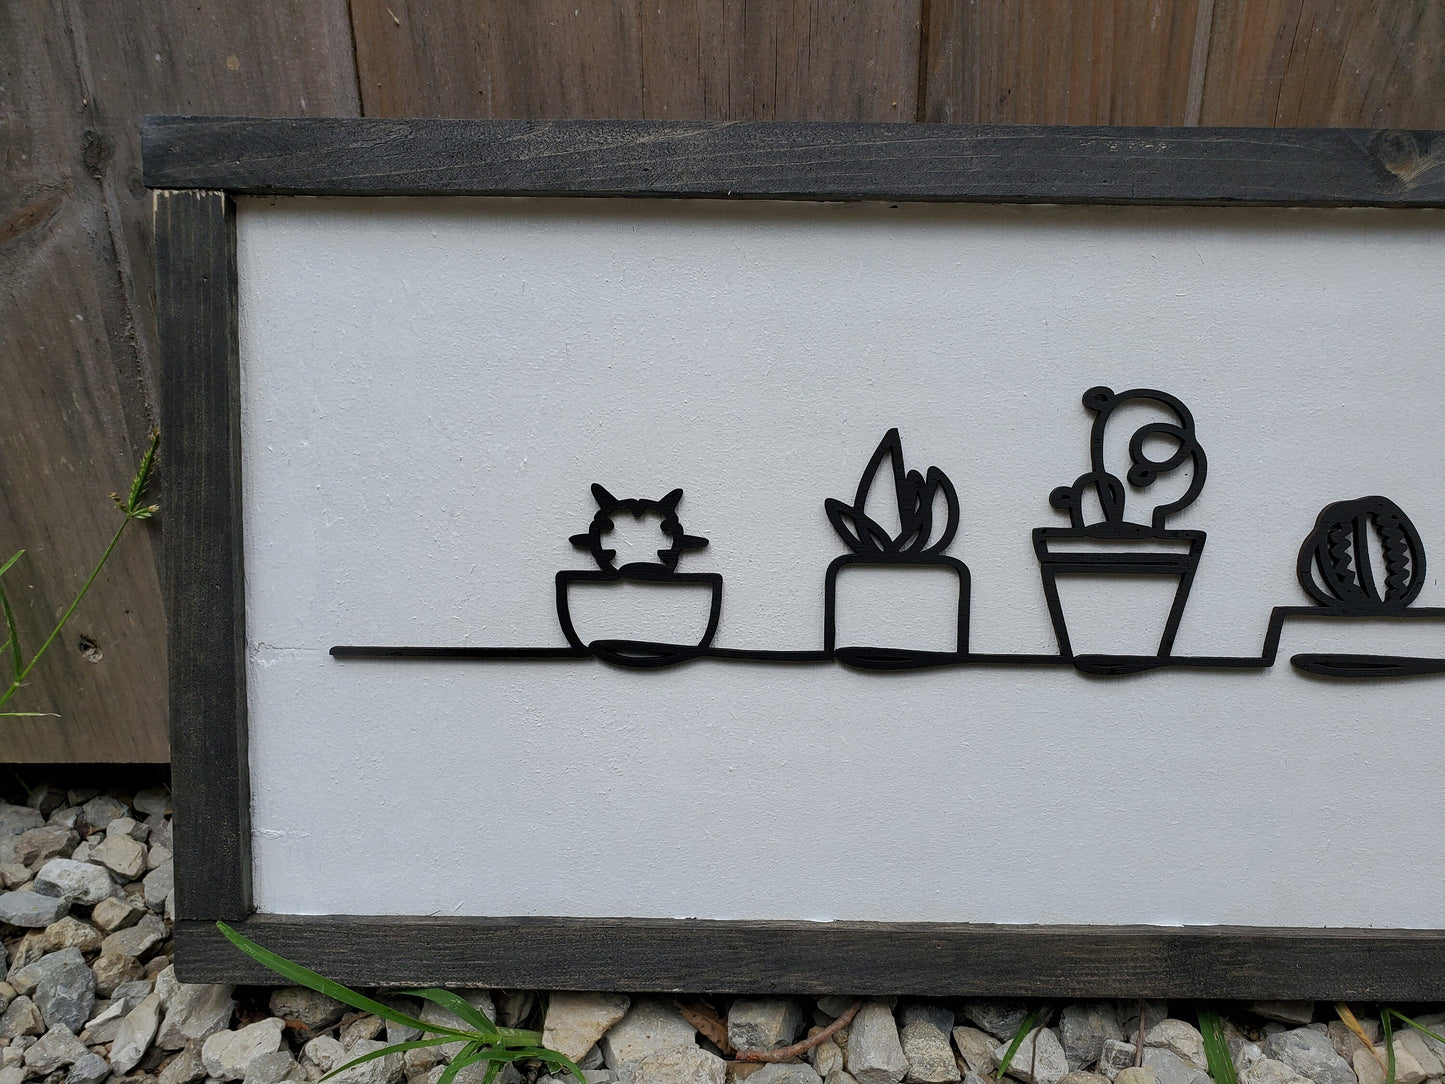 Cat, Cactus, Plants, Kitten, Silhouette, Western, Line Art, 3D, Raised Text Sign, Rustic, Farmhouse, Shabby Chic, Wood, White and Black